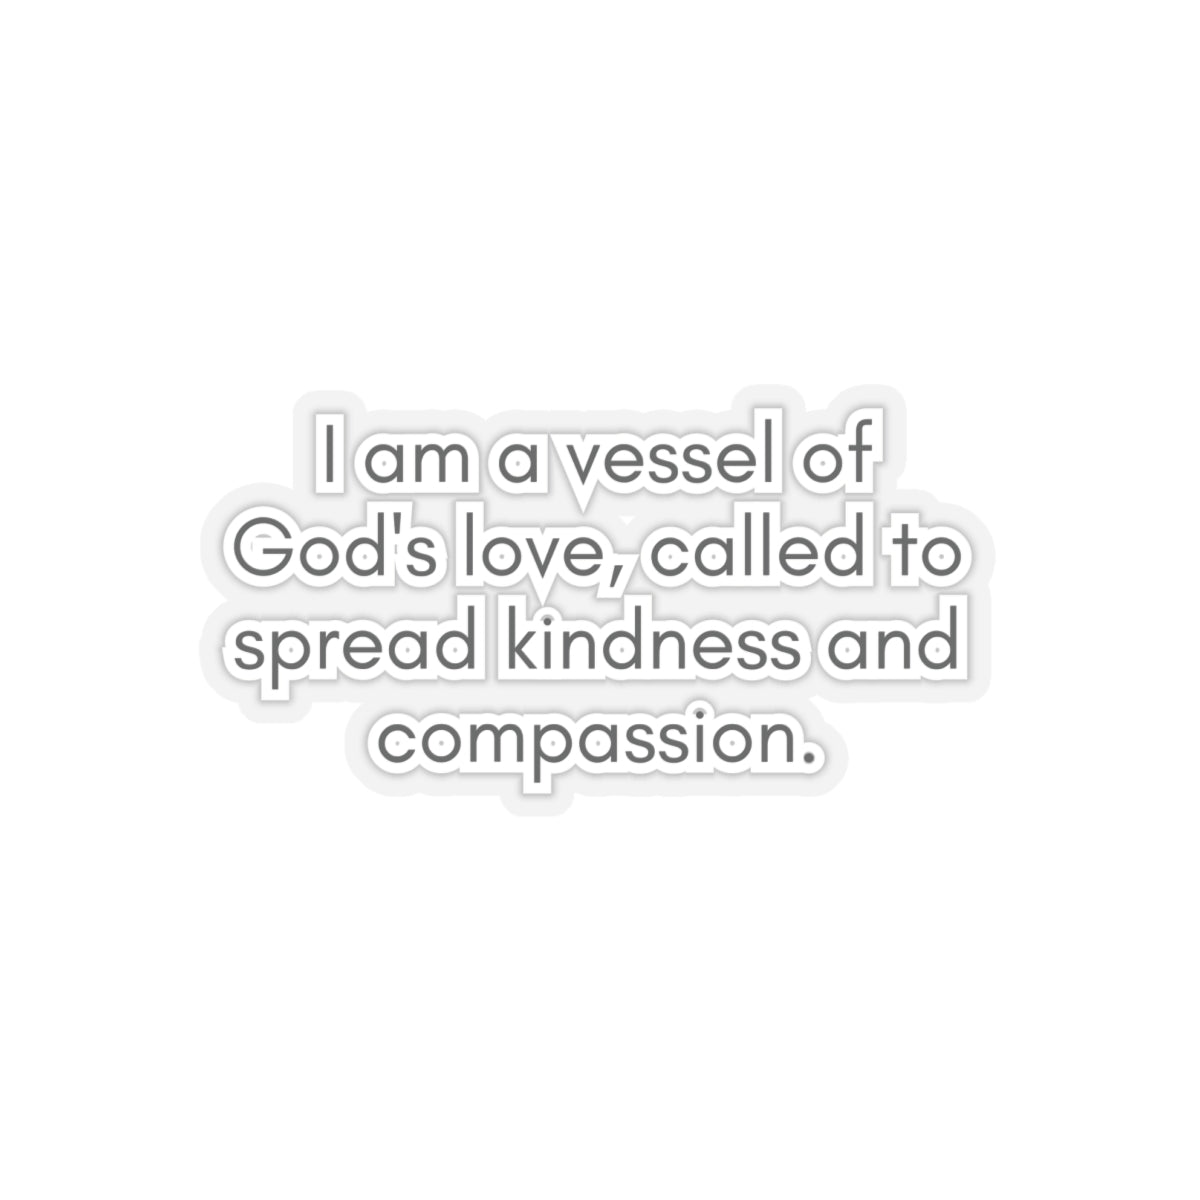 I Am A Vessel Of God's Love... Inspirational Quote Kiss-Cut Stickers-Paper products-6" × 6"-Transparent-mysticalcherry